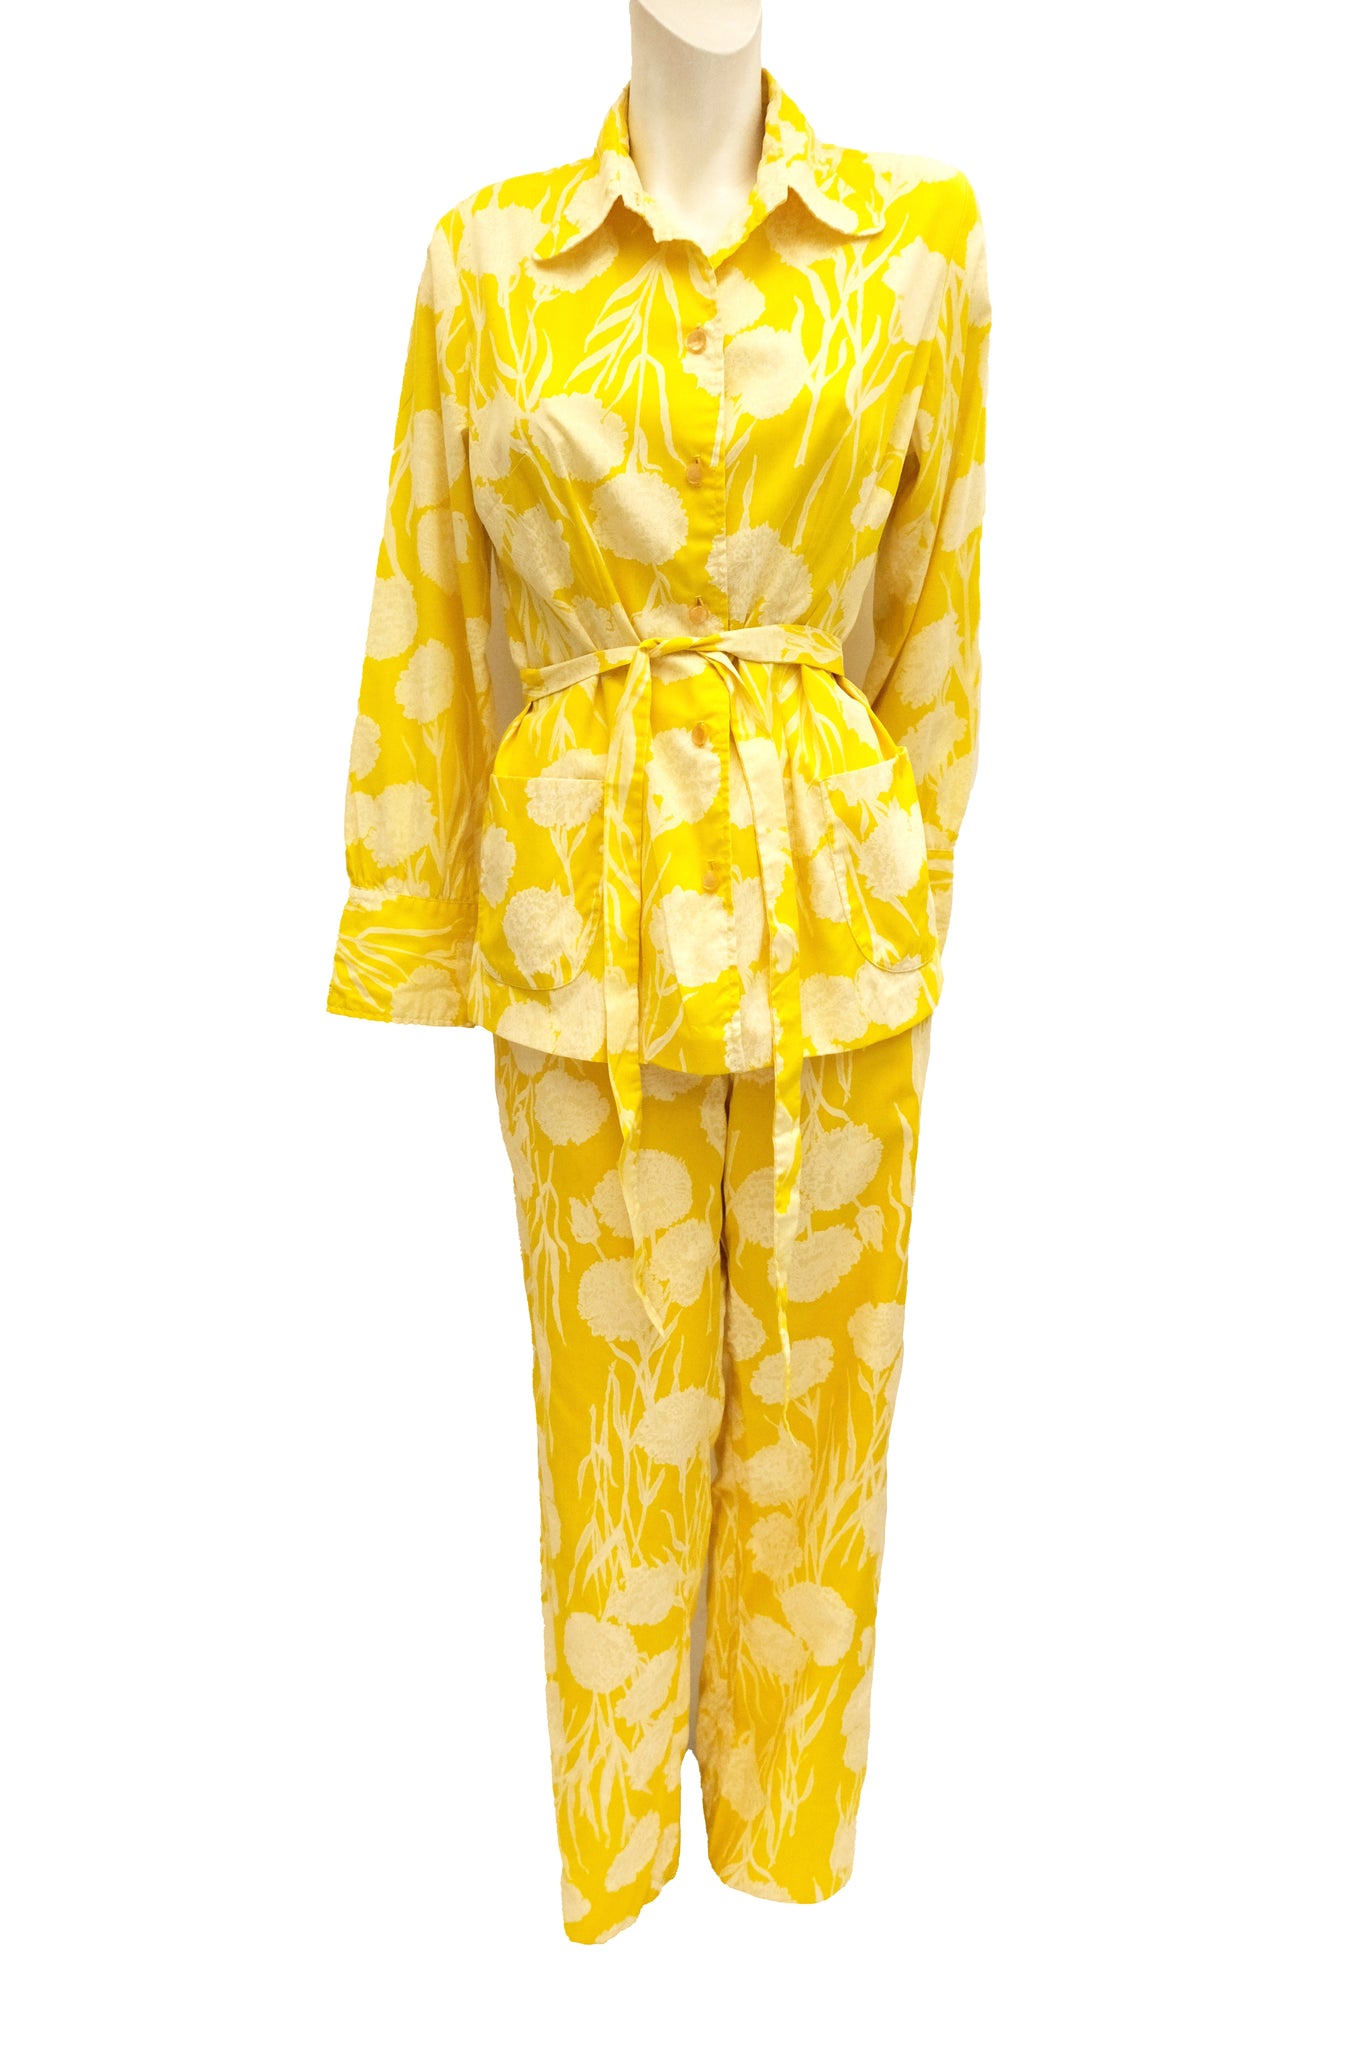 Lilly Pulitzer Bright Yellow Floral Pyjama Lounge Suit, UK12-14 ...